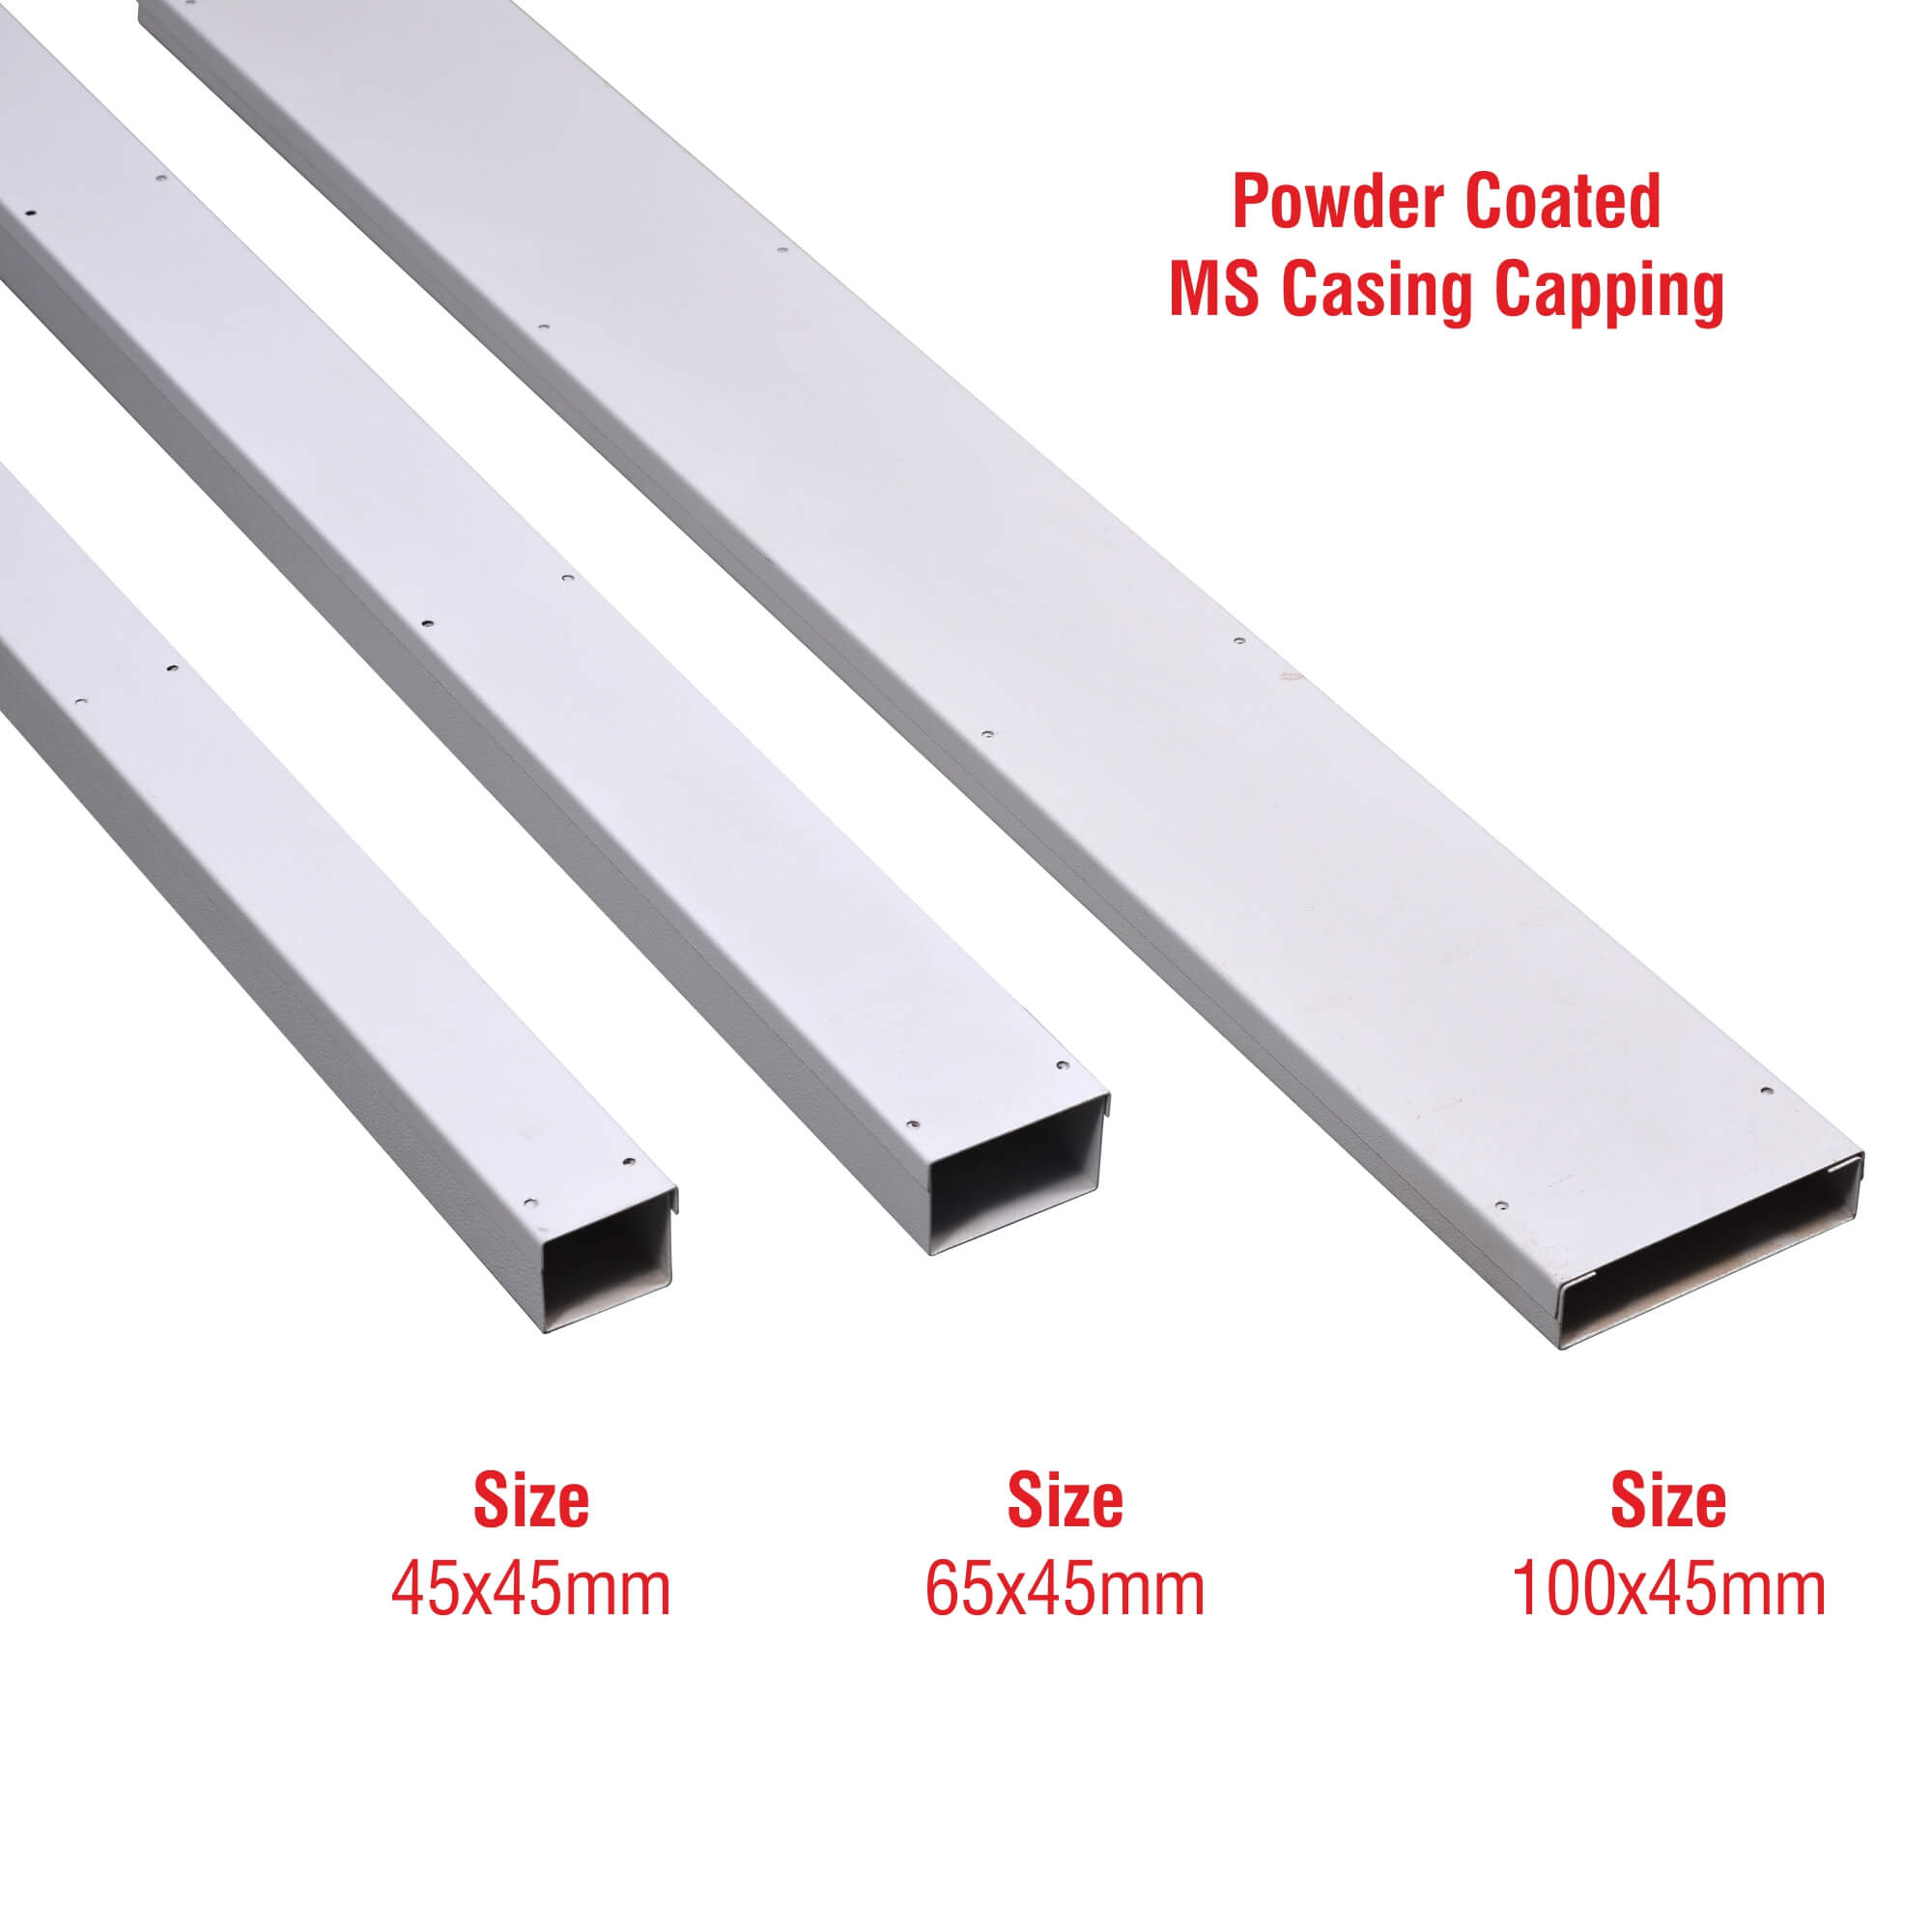 Powder Coated Metal Casing Capping / PVC Casing Capping